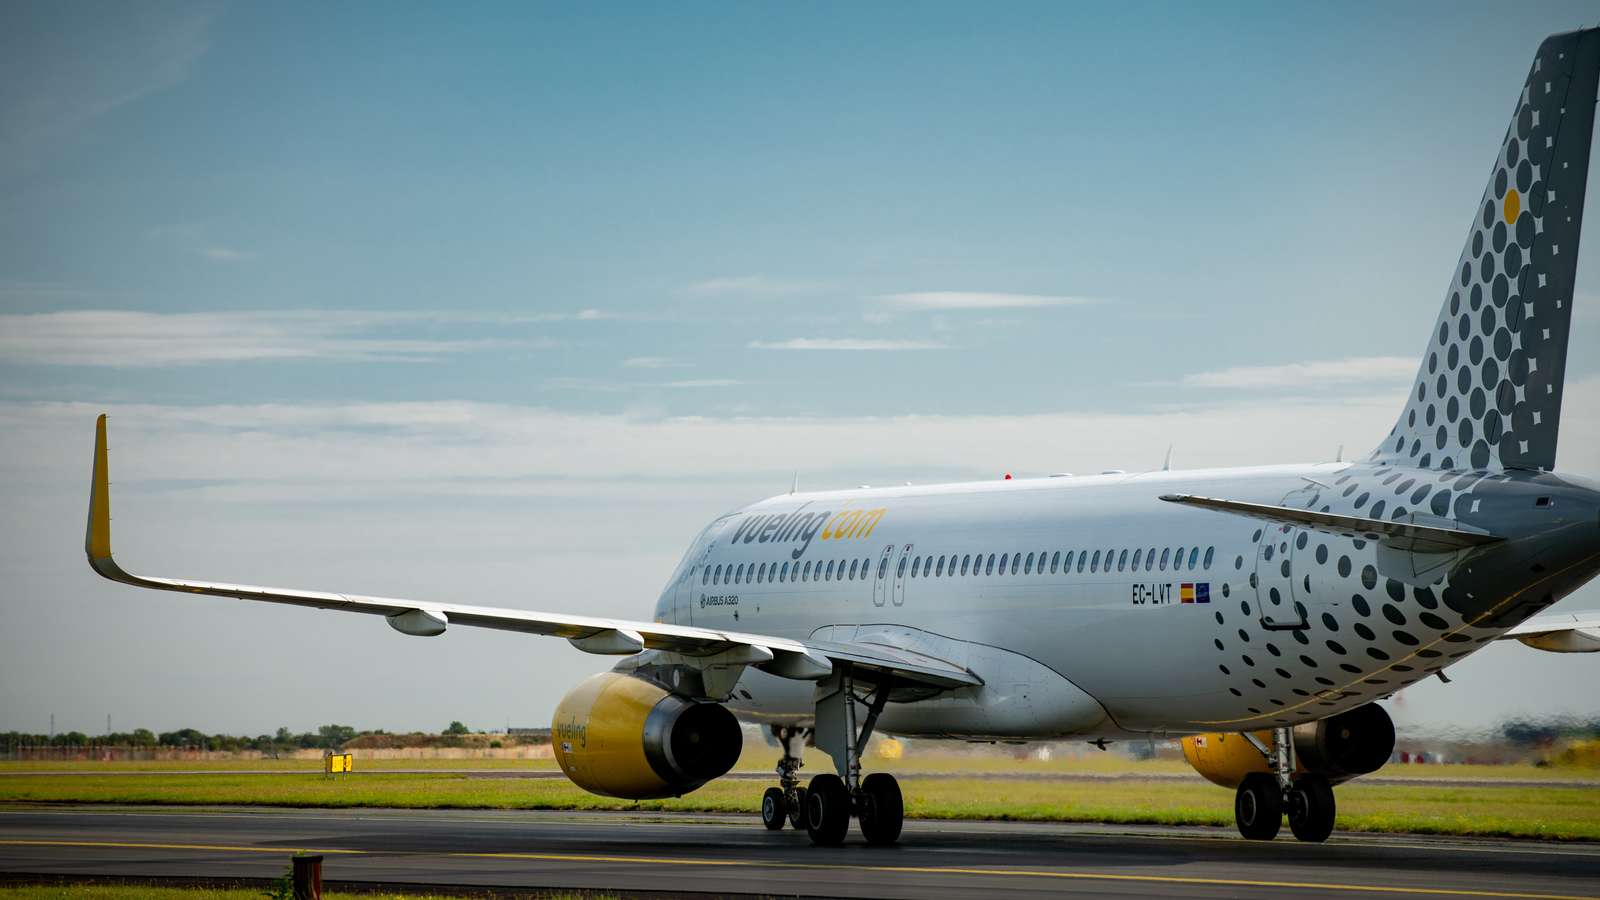 Vueling Airbus A320 taxi